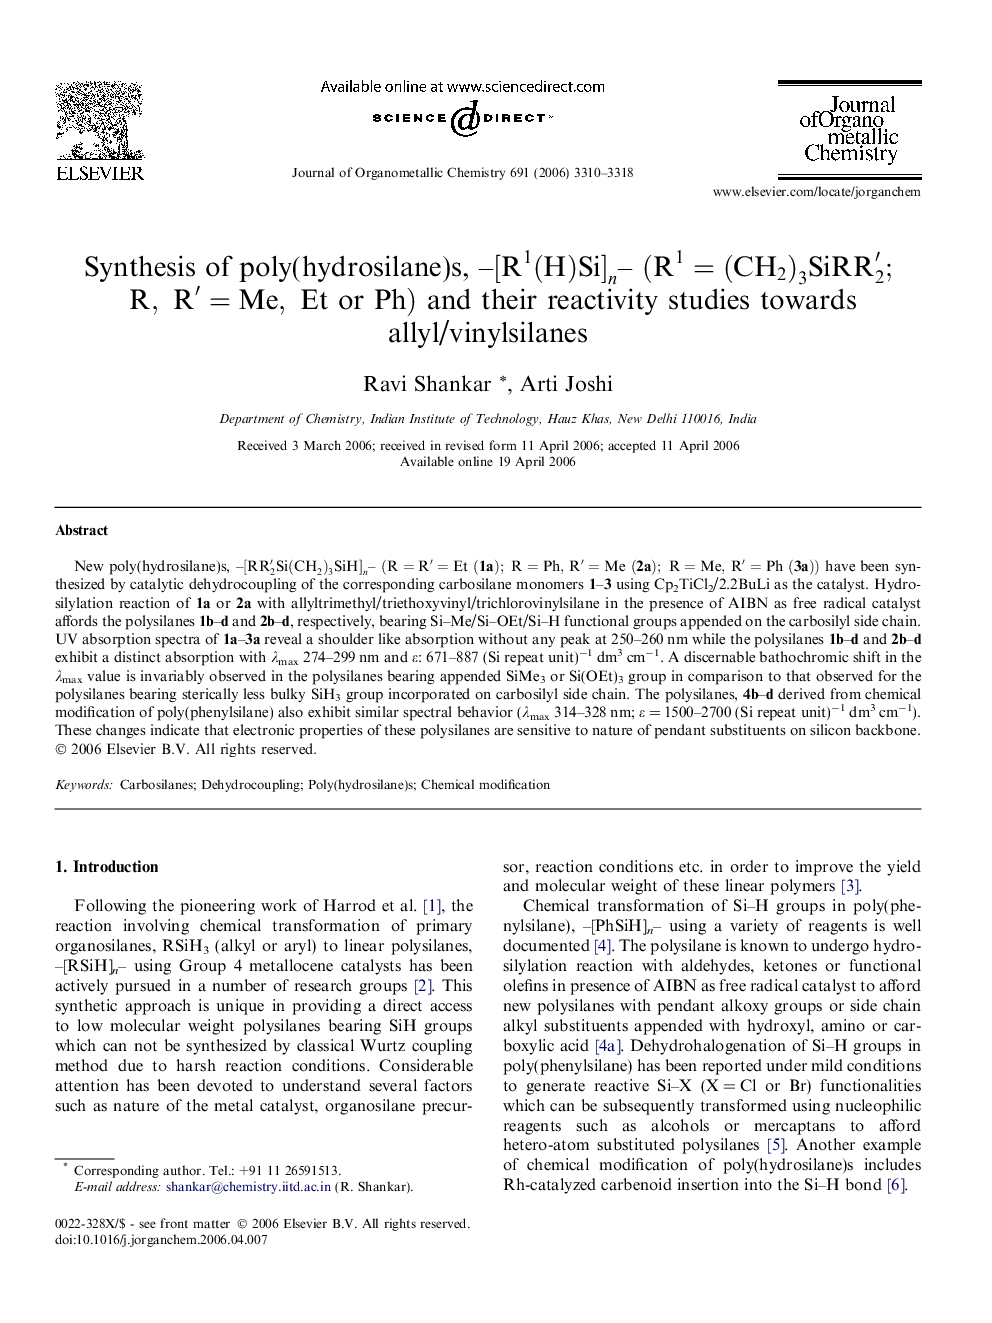 Synthesis of poly(hydrosilane)s, –[R1(H)Si]n–(R1=(CH2)3SiRR2′;R,R′=Me, Et or Ph) and their reactivity studies towards allyl/vinylsilanes